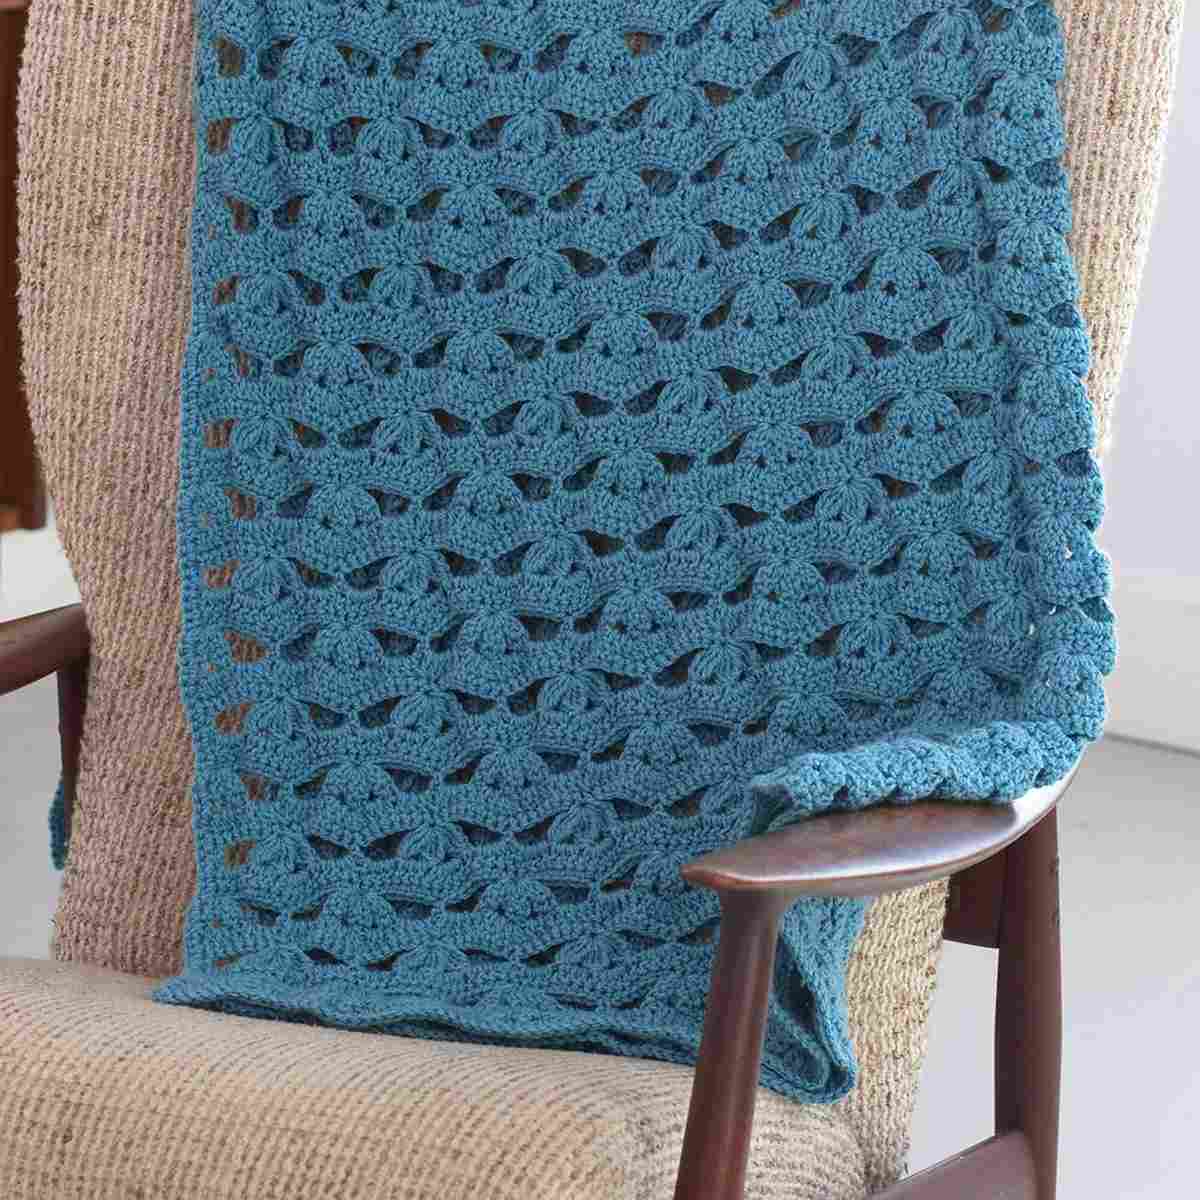 Light and Airy Afghan Crochet - Free Crochet Pattern